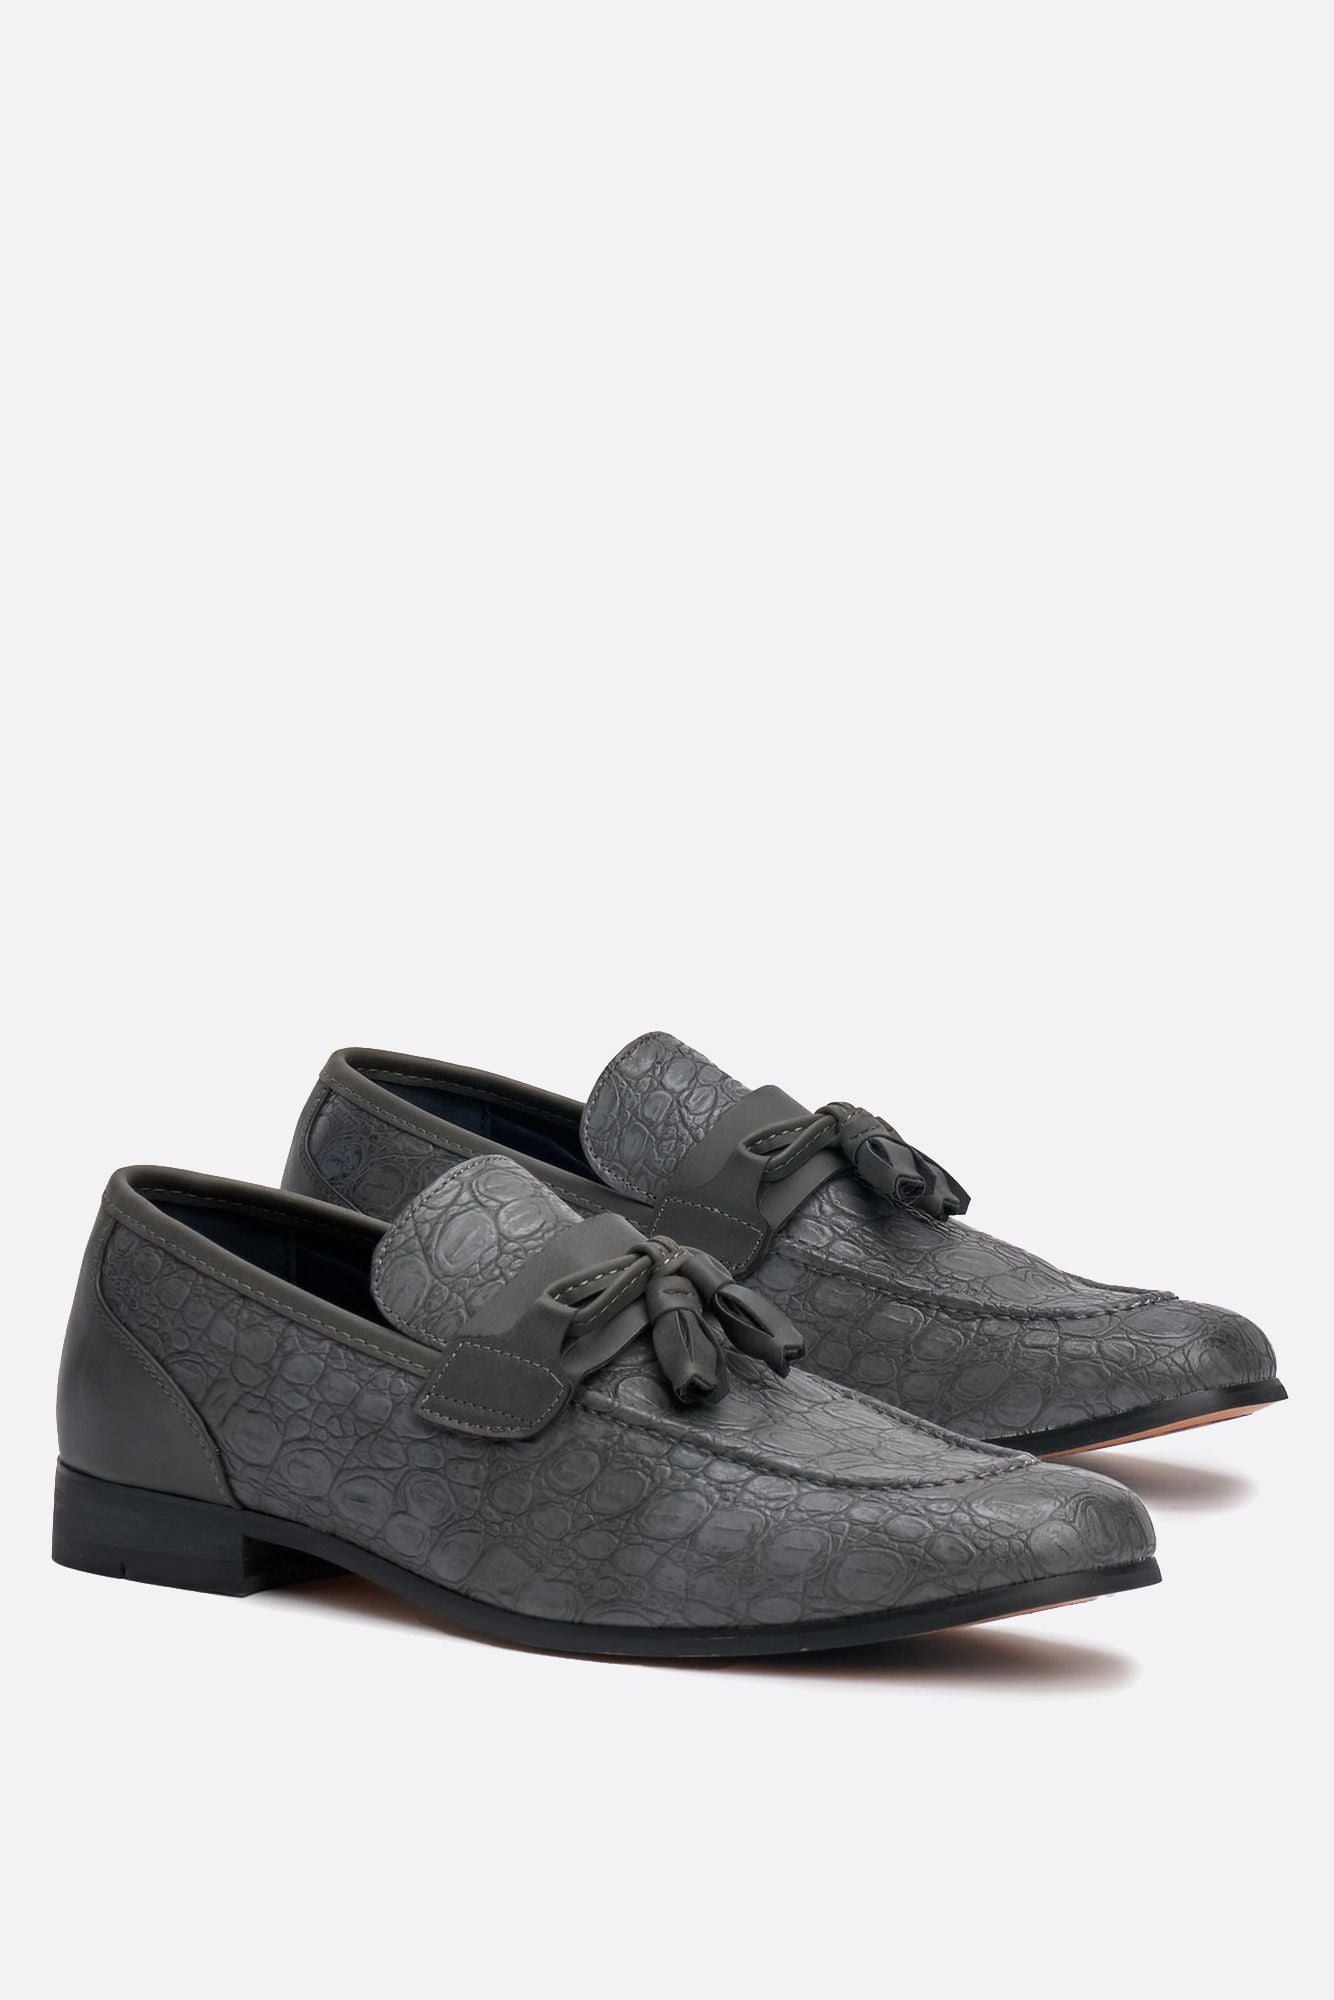 Brindisi Grey Loafers